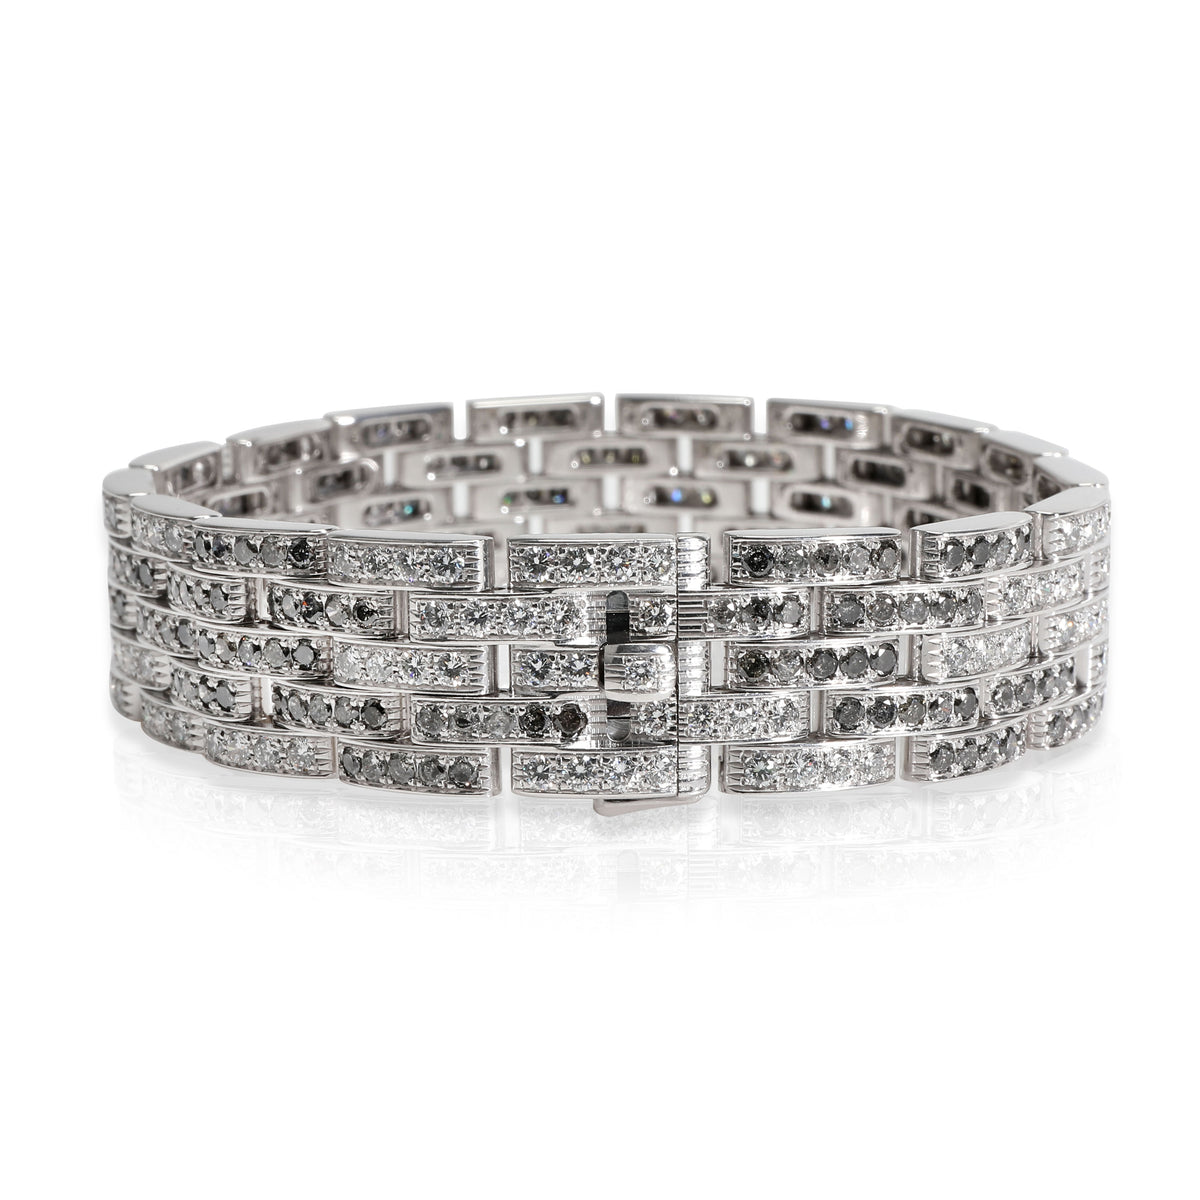 Cartier Maillon Panthere Diamond Bracelet in 18K White Gold 10 CTW